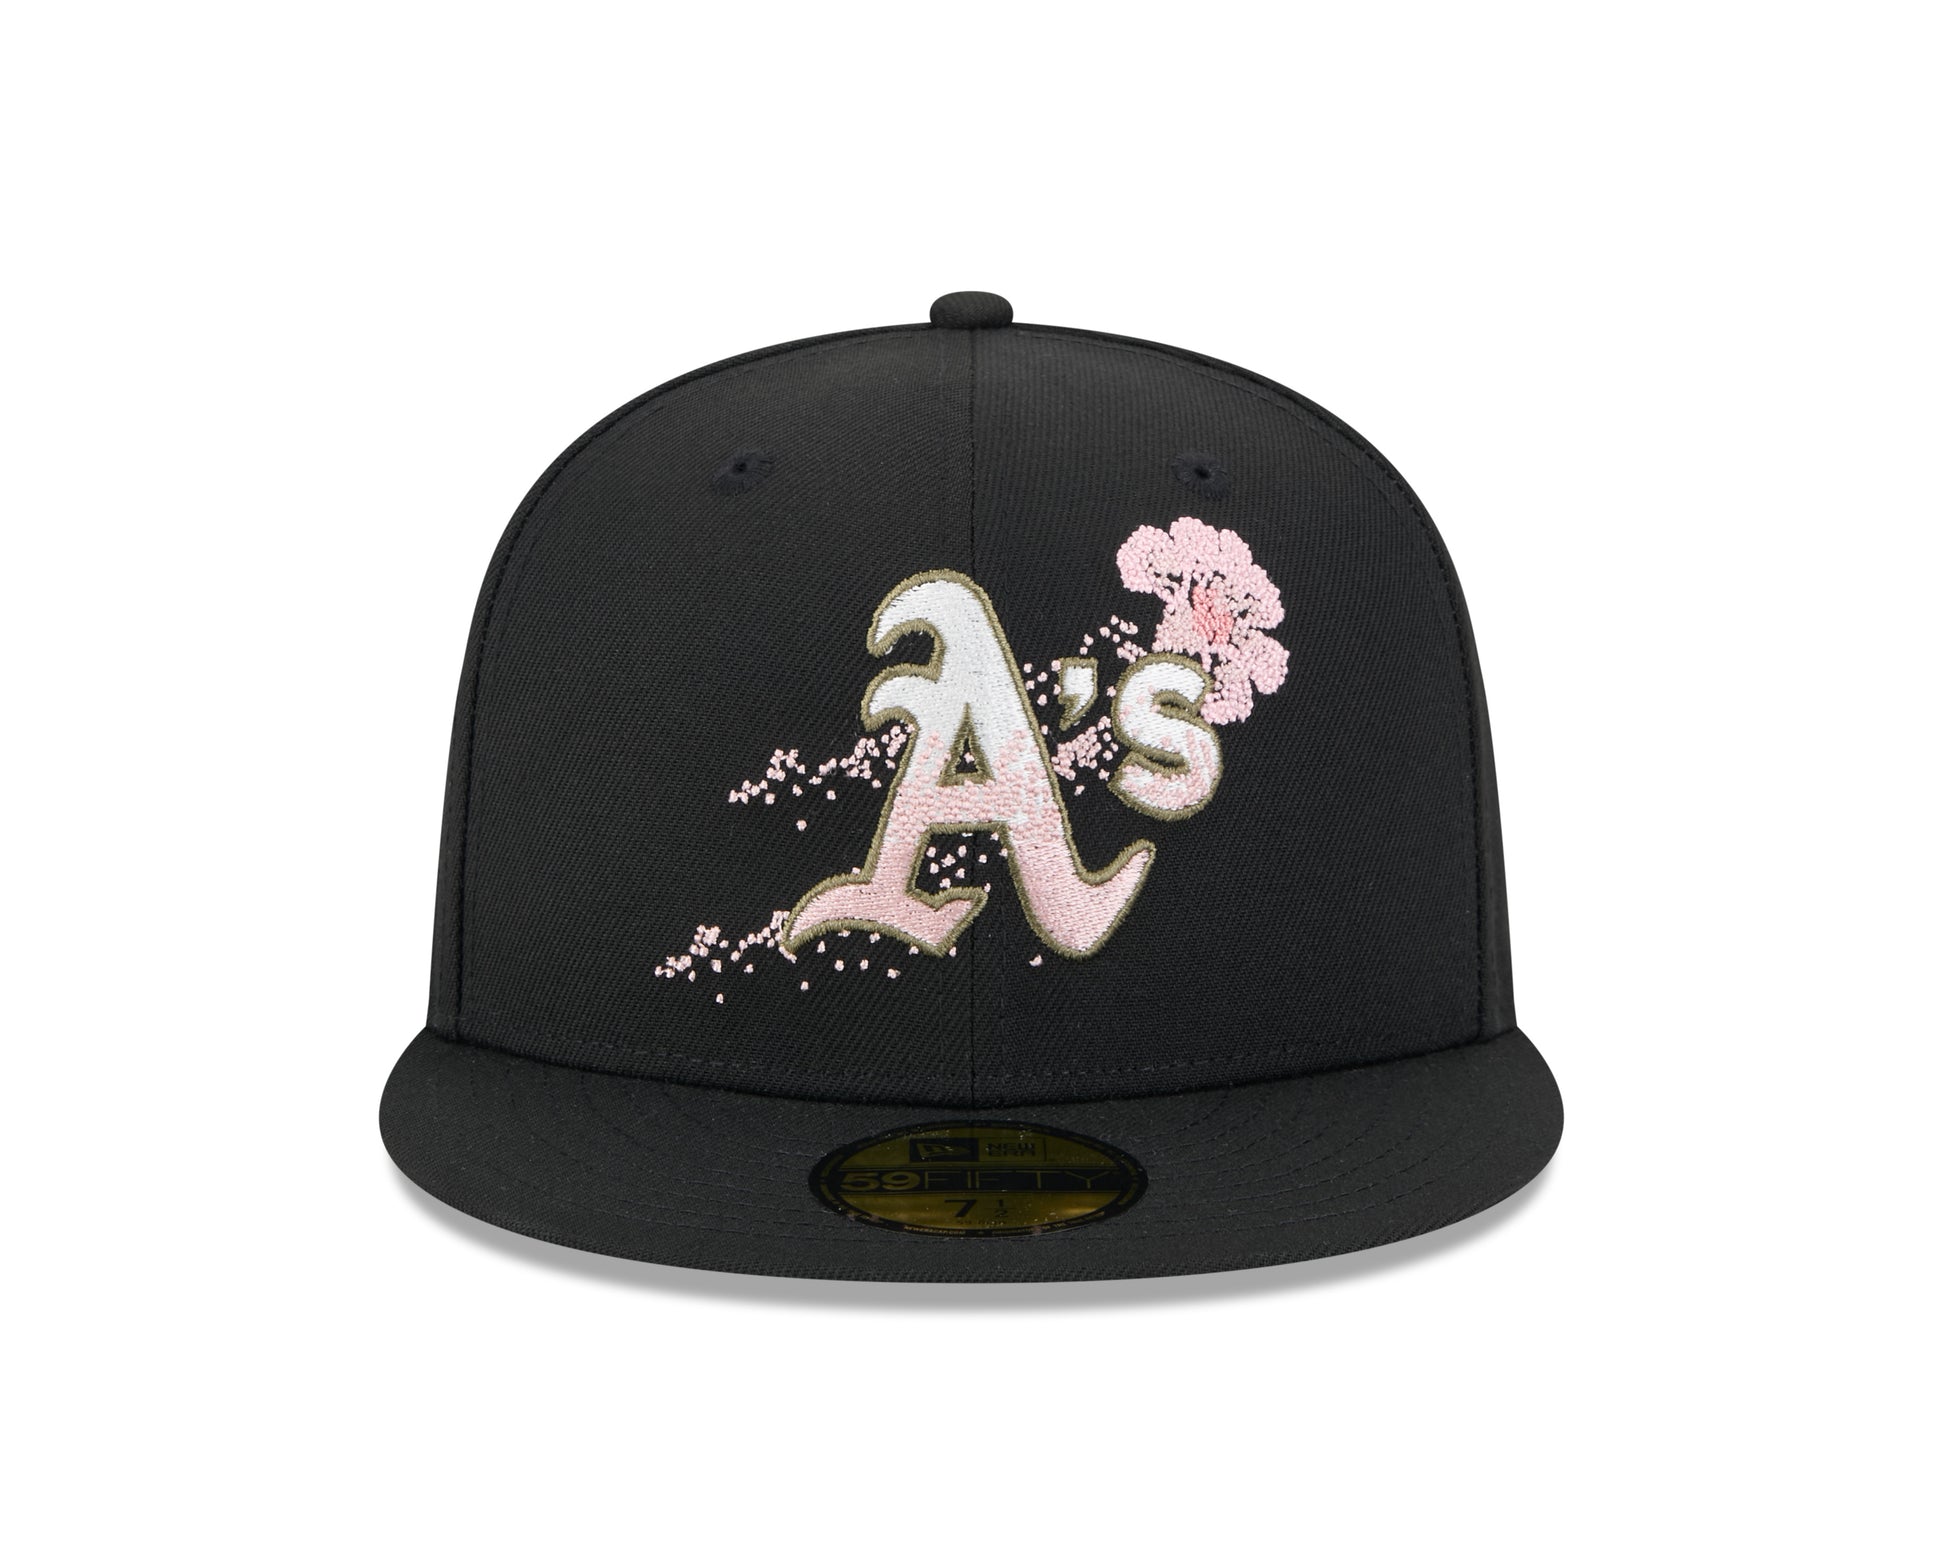 New Era - 59fifty Fitted Cap - Oakland Athletics - DOTTED FLORAL - Black - Headz Up 